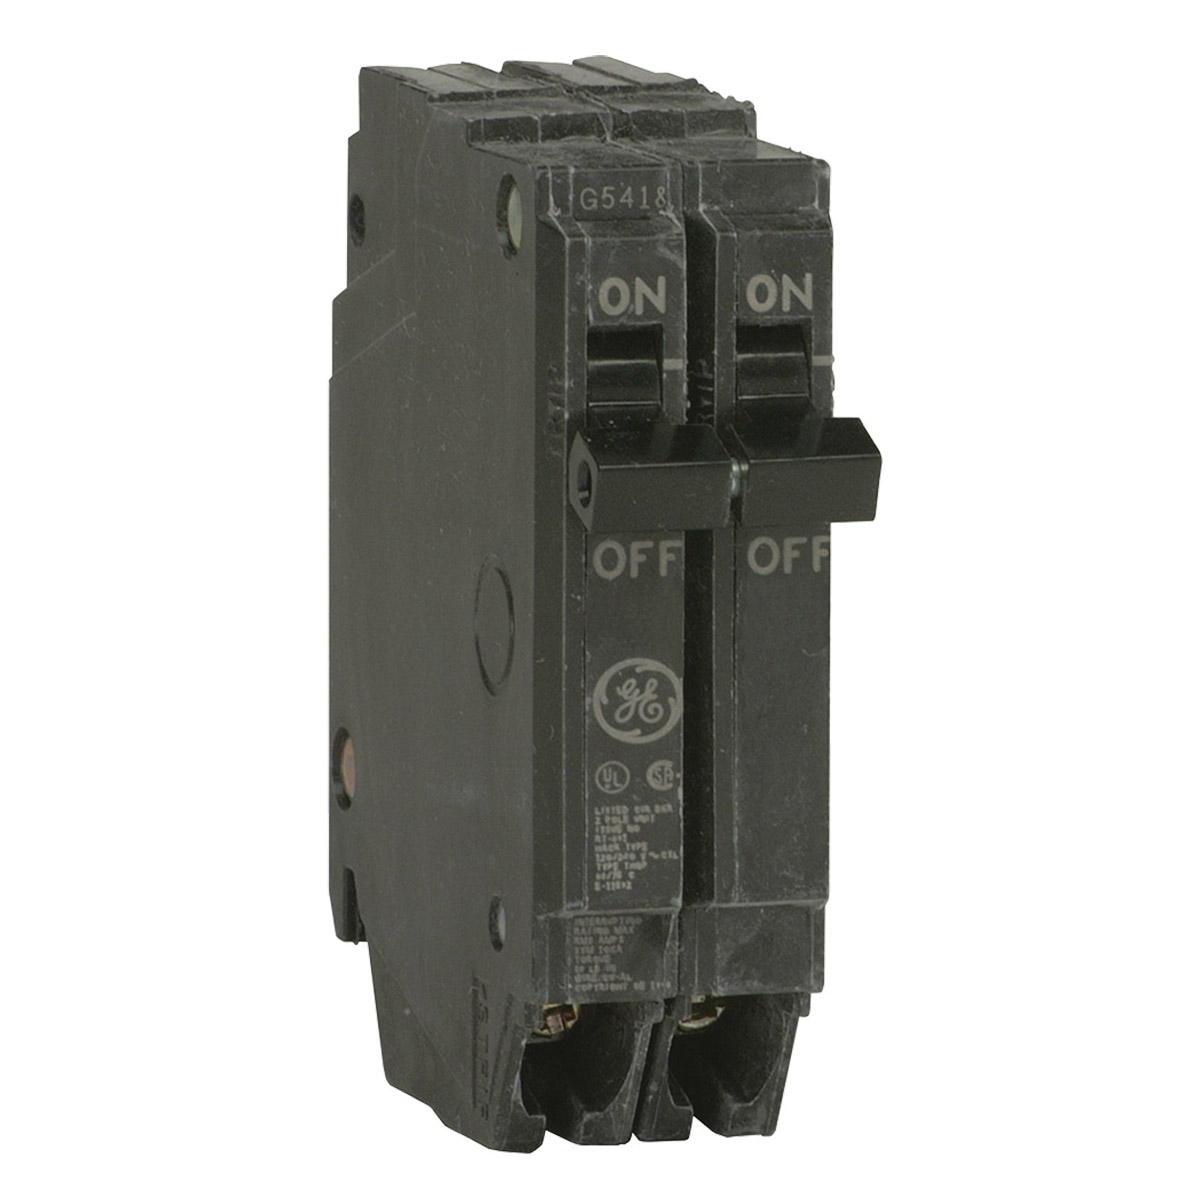 THQP220 Feeder Circuit Breaker, Type THQP, 20 A, 2 -Pole, 120/240 V, Plug Mounting